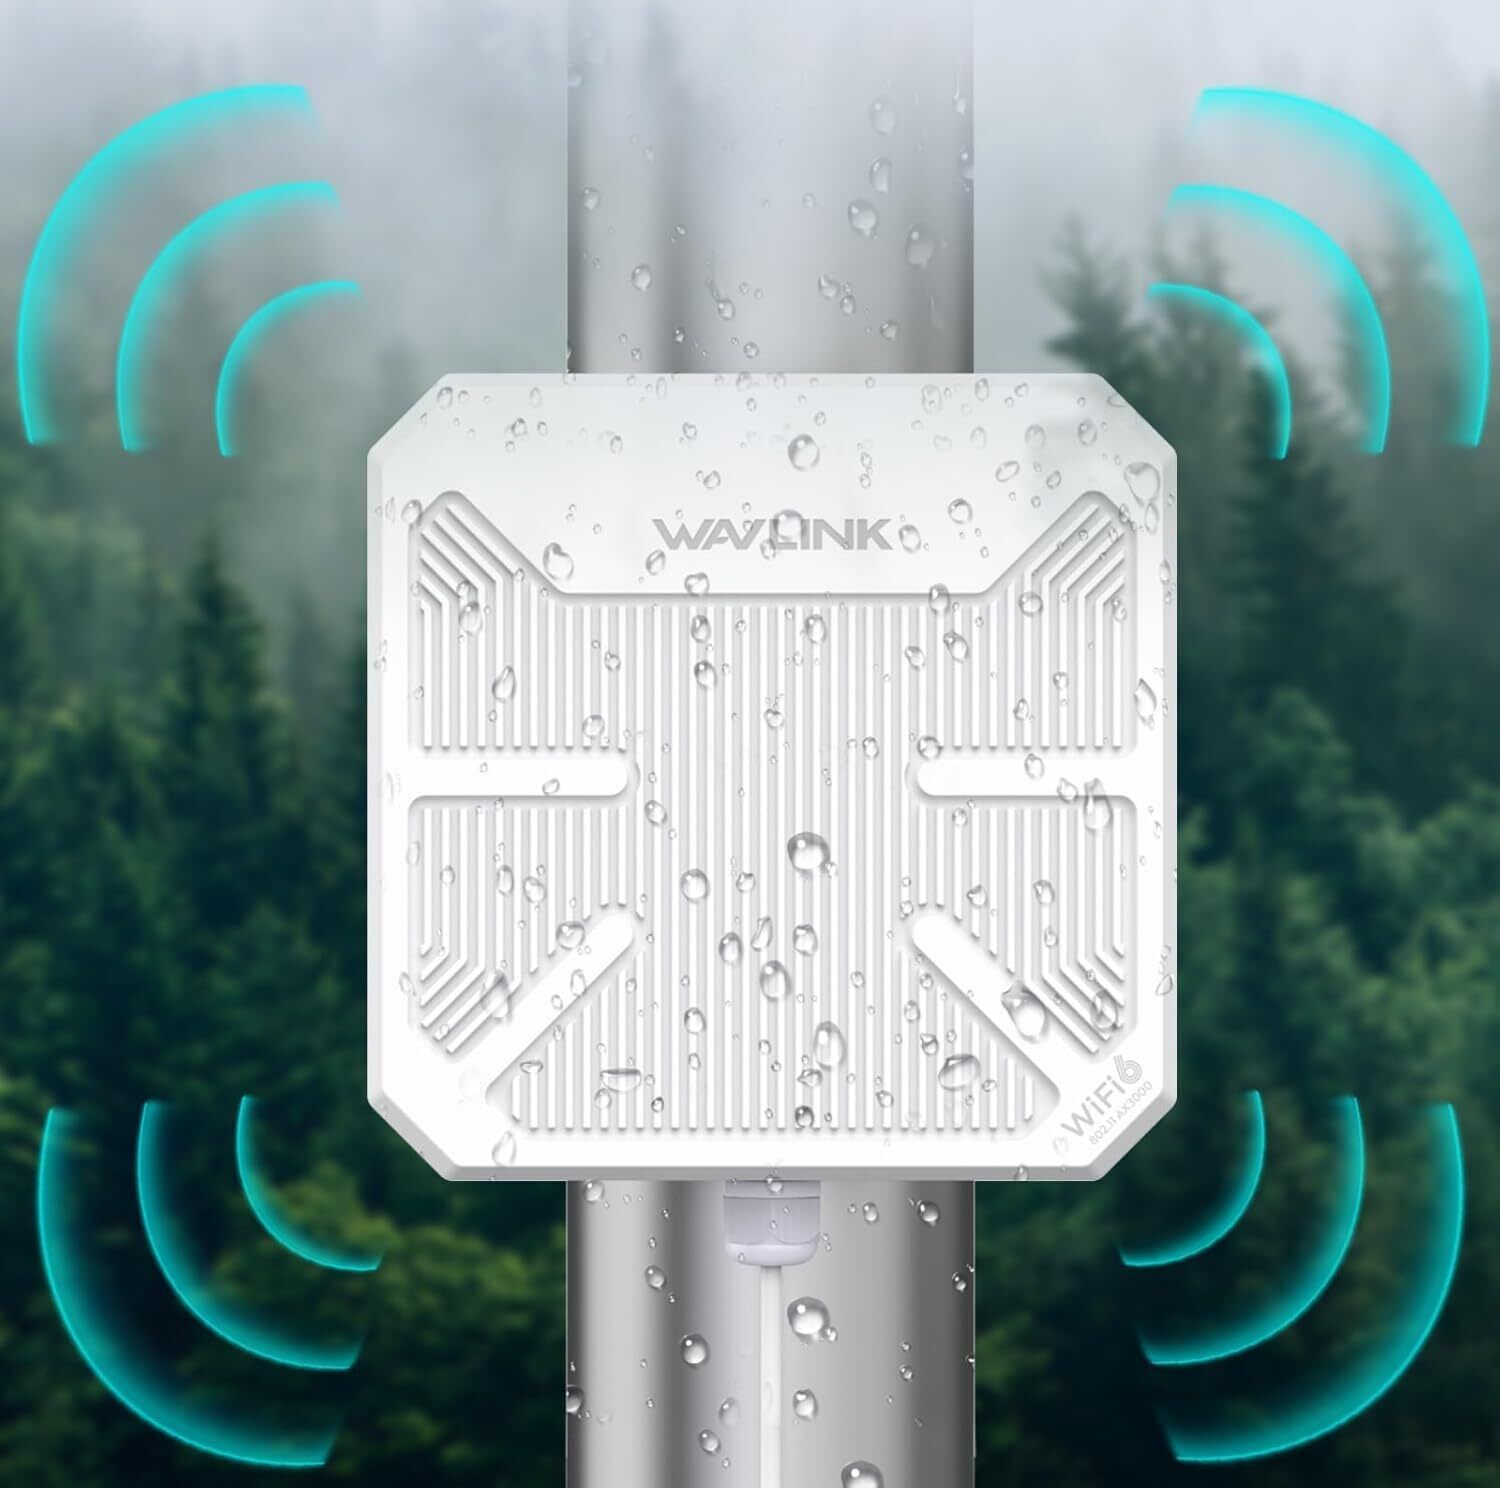 AX3000 Outdoor WiFi 6 Gigabit Dual Band Router IP67 Weathproof up to 256 Devices